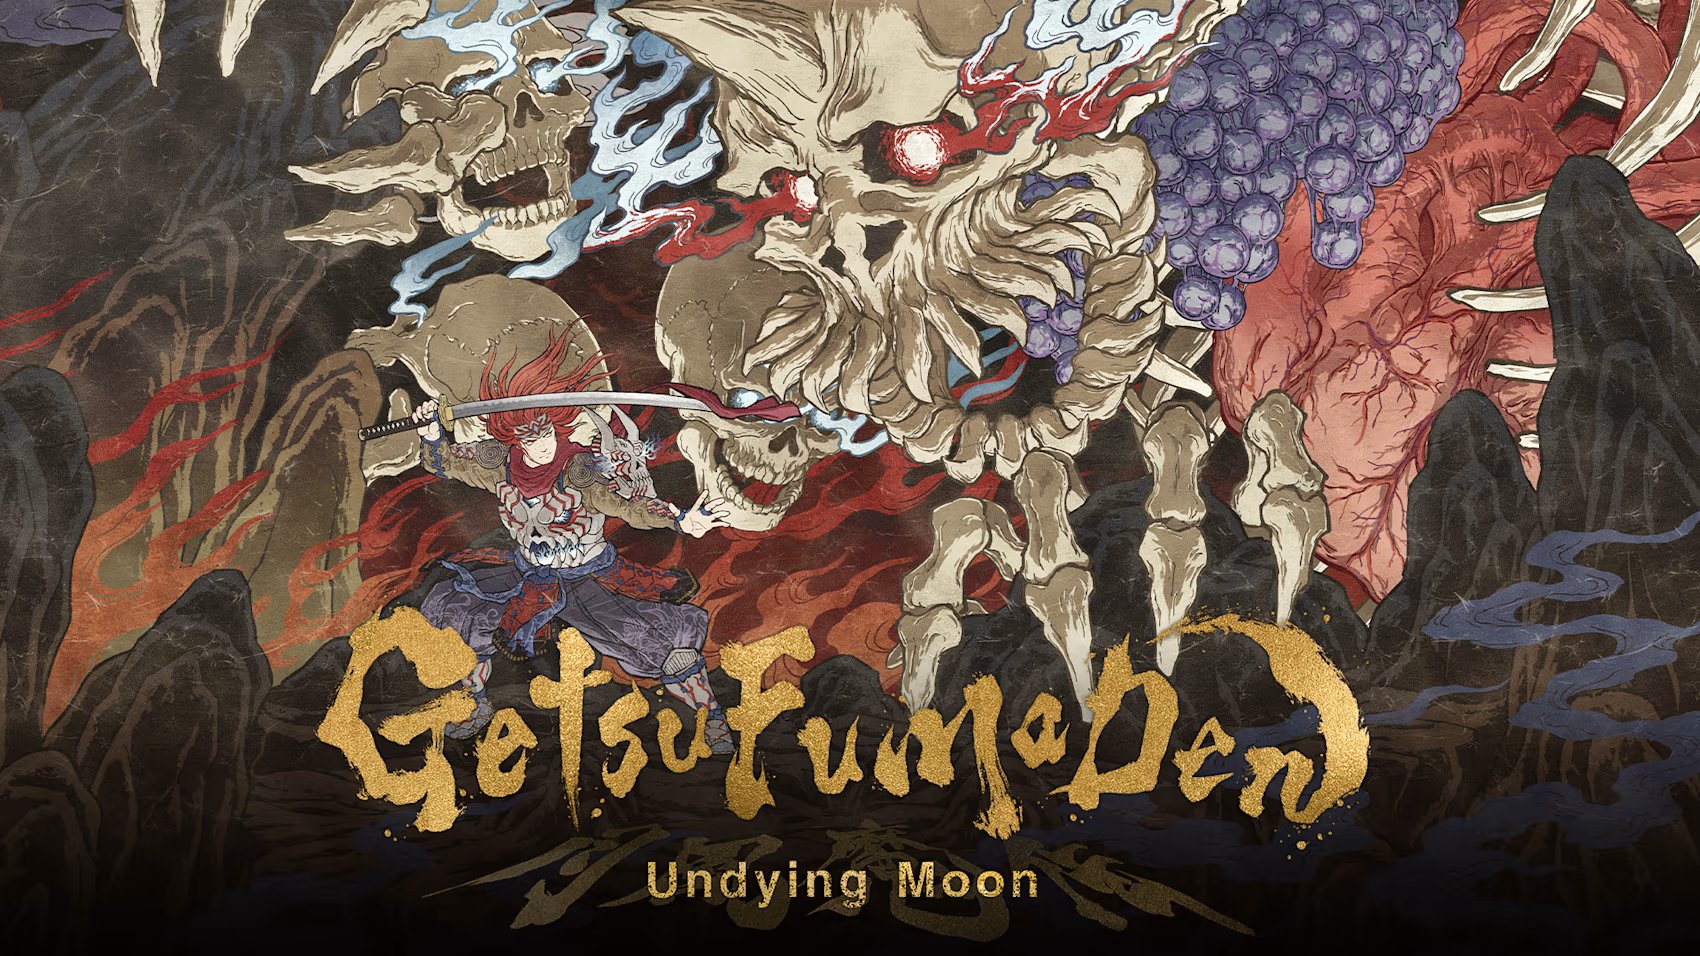 GetsuFumaDen: Undying Moon Digital Deluxe Edition Switch NSP